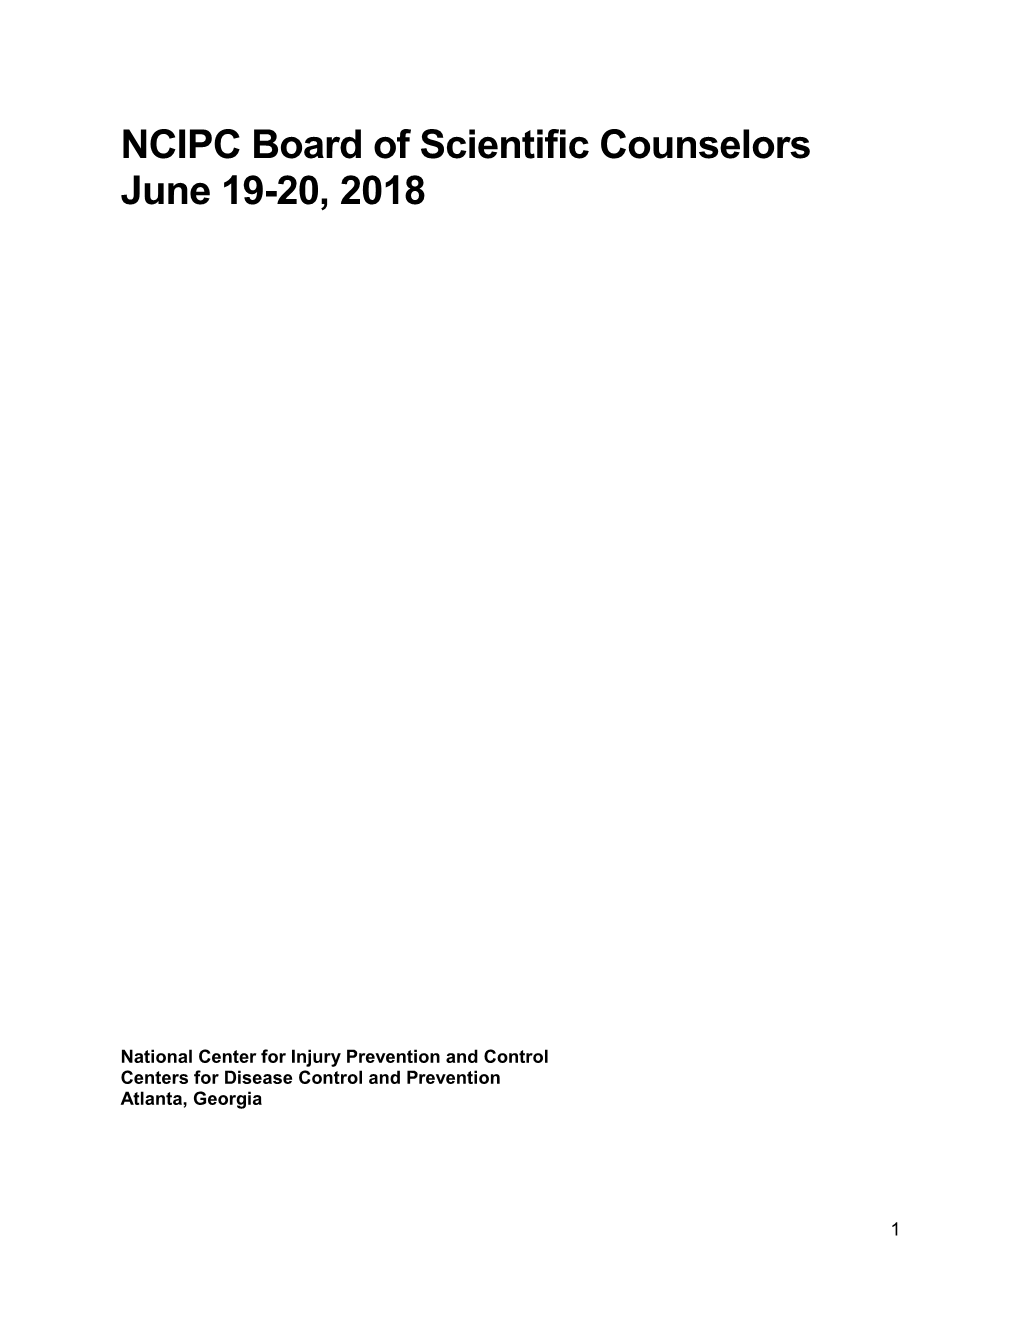 NCIPC Board of Scientific Counselors Draft Meeting Notes